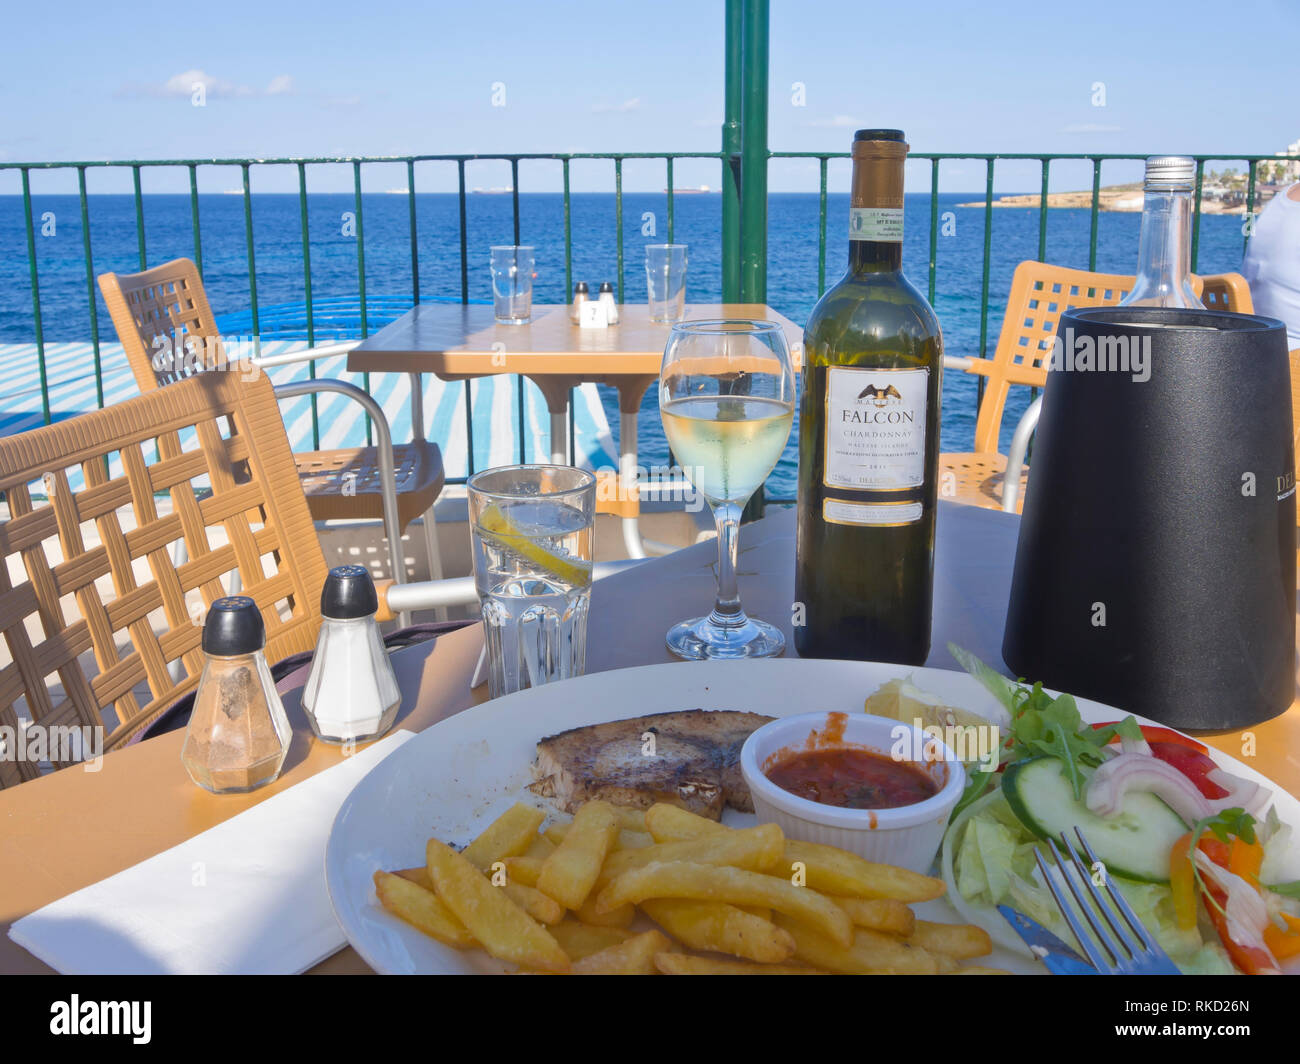 Swordfish with chips and salad and a bottle of the Maltese white wine Falcon, views of the Mediterranean sea in Bugibba St. Paul's Bay Malta Stock Photo